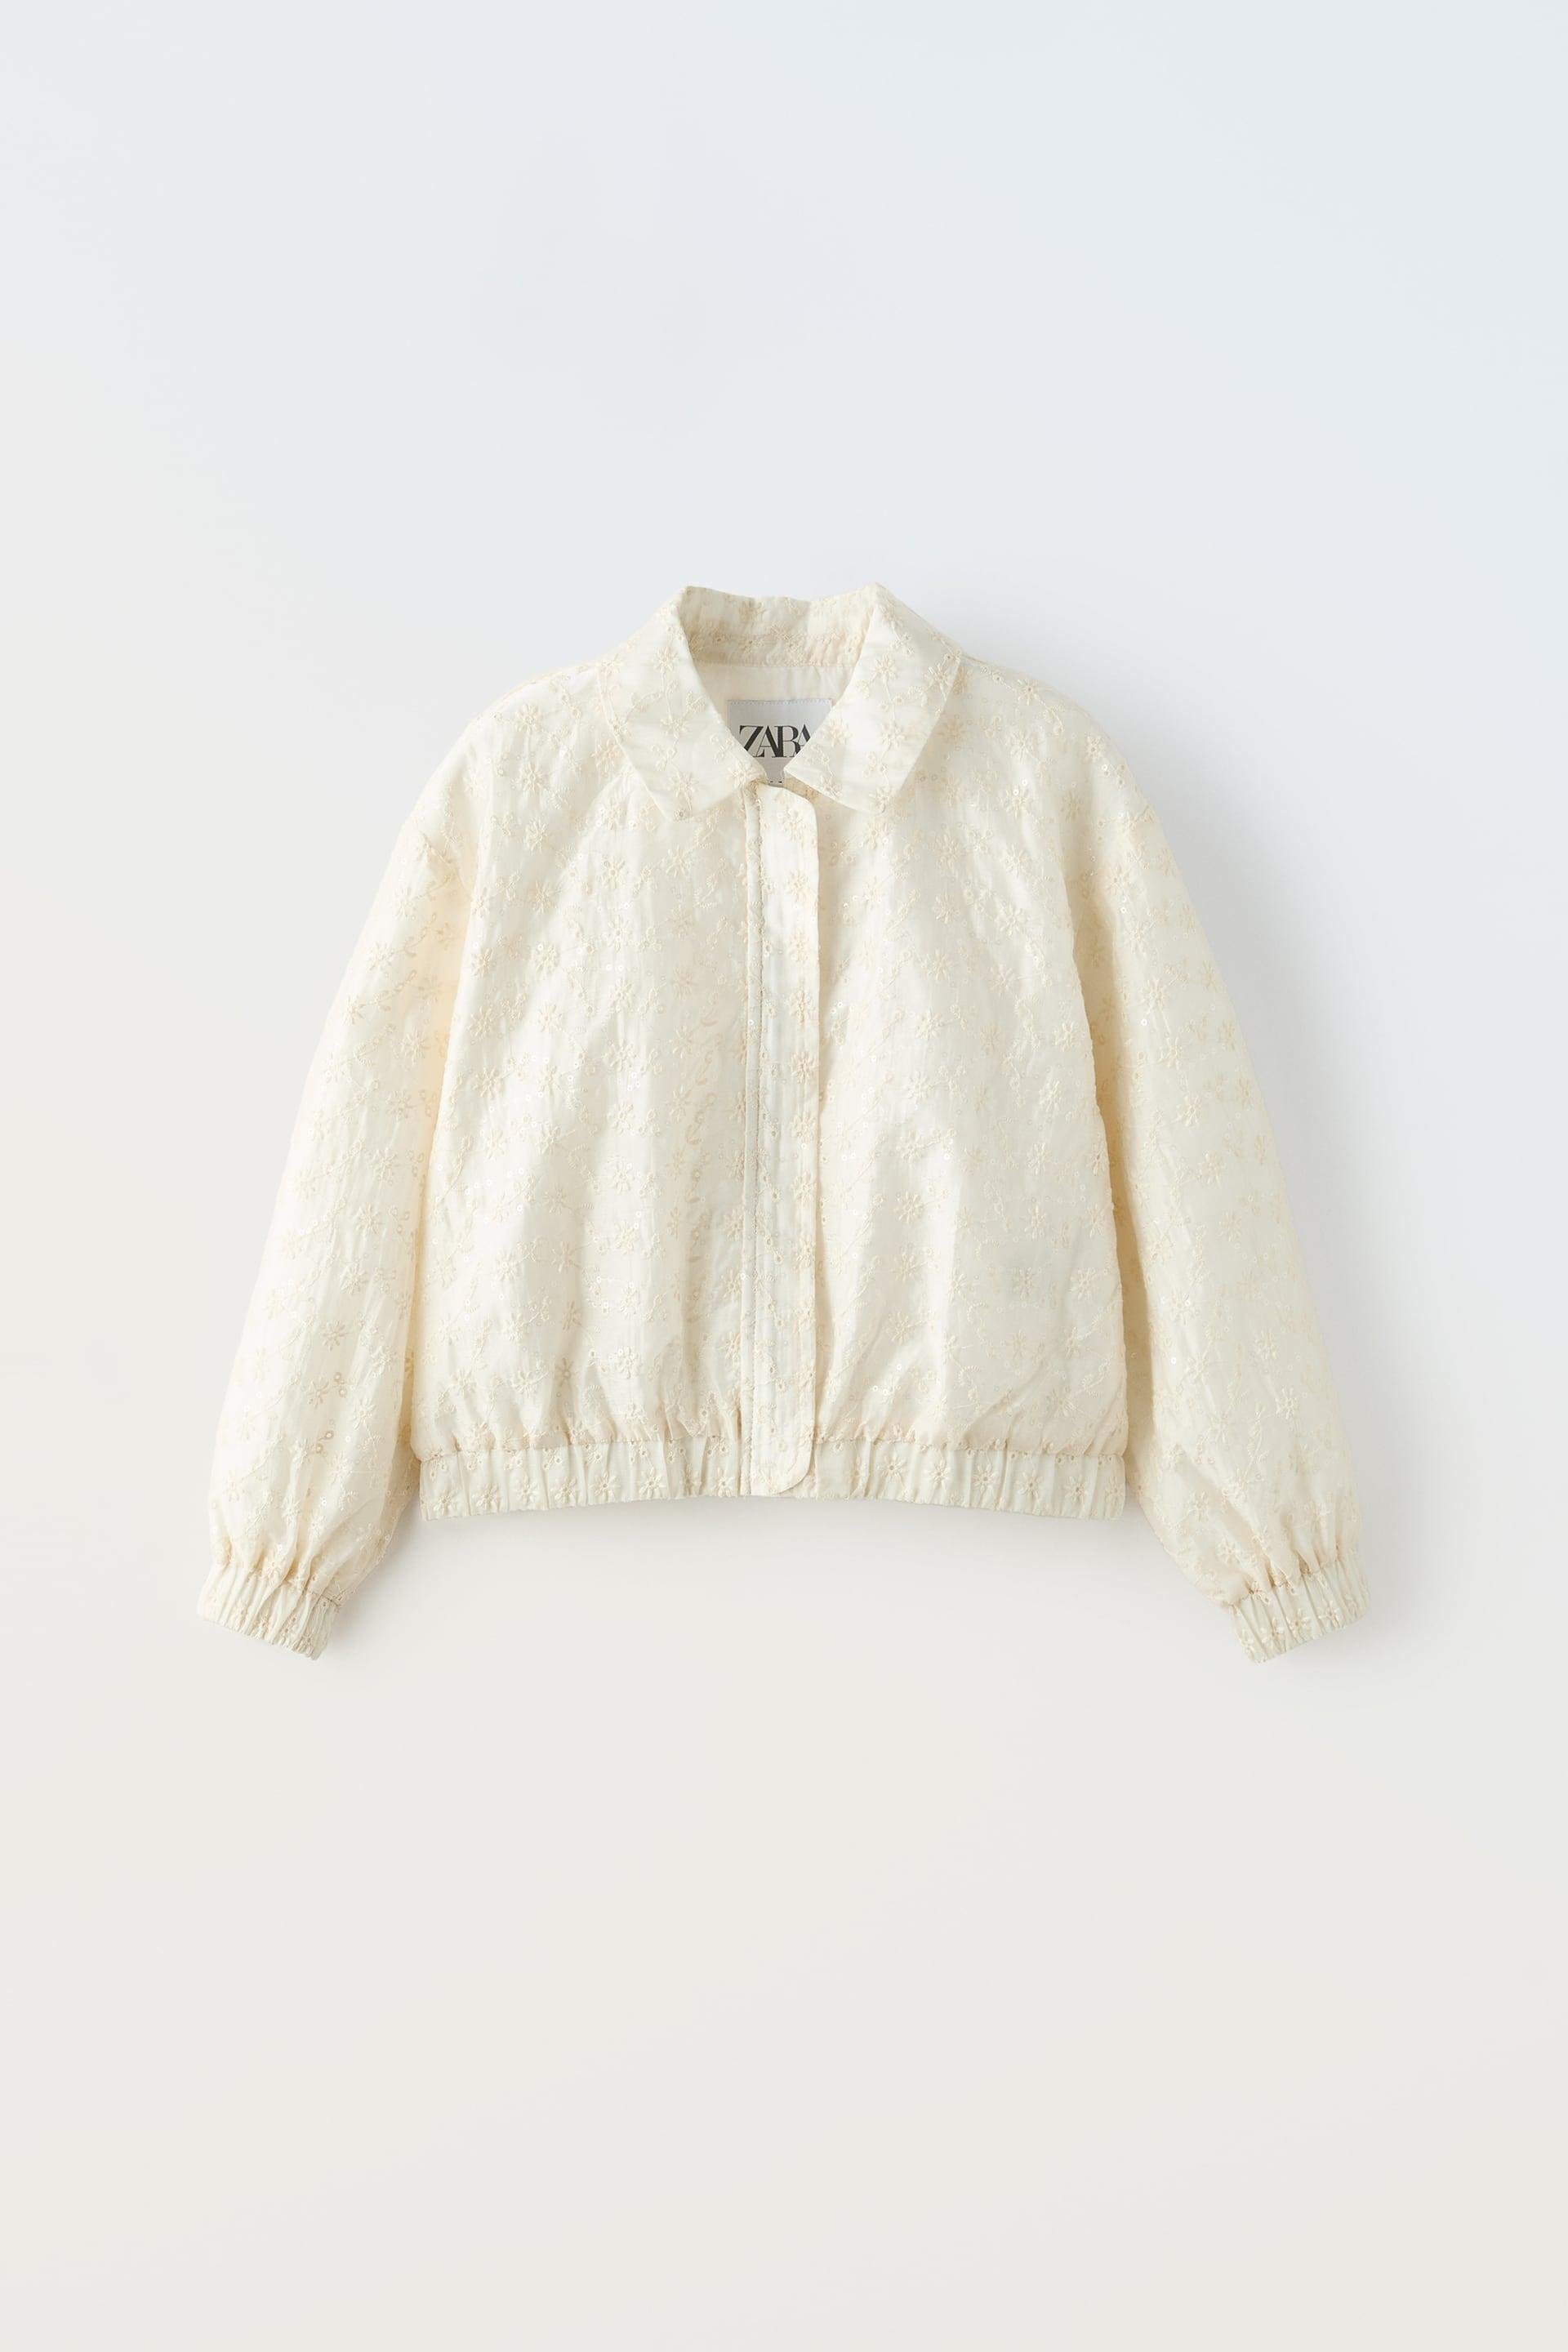 EMBROIDERED SEQUIN BOMBER by ZARA